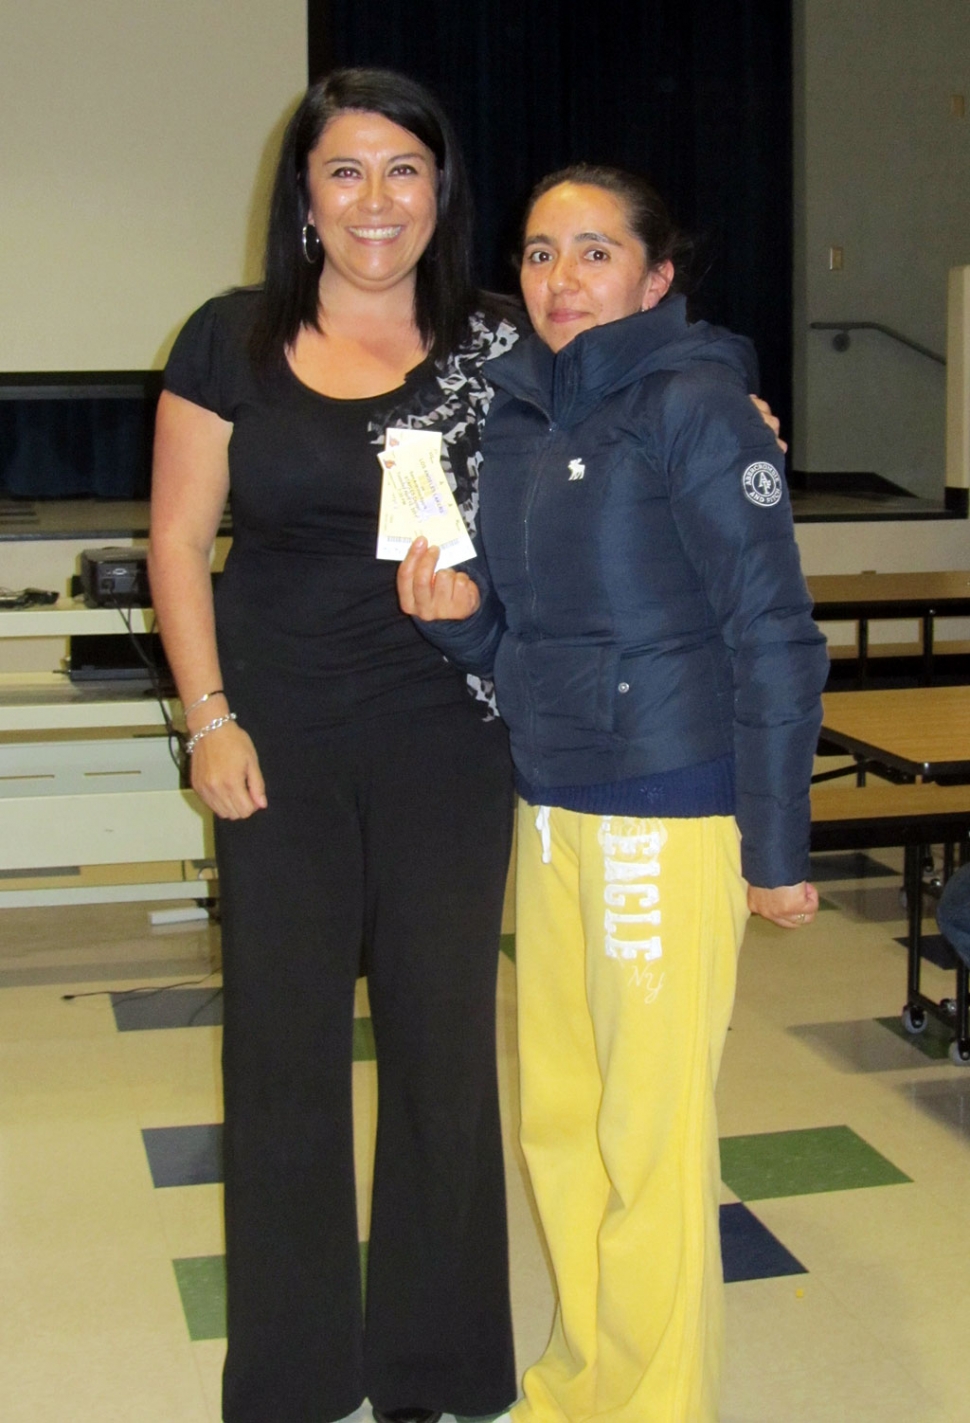 On Wednesday, February 23, Mountain Vista Elementary held a parent involvement night. The principal provided an overview of the instructional day and gave parents suggestions on how to support their children at home and ways to get involved at Mountain Vista School. At the end of the night, the Mrs. Schieferle raffled off two Los Angeles Laker tickets. The lucky parent was Maria Martinez. Mrs. Martinez will be headed to the Staple Center on April 12th to see the Lakers play against the San Antonio Spurs!